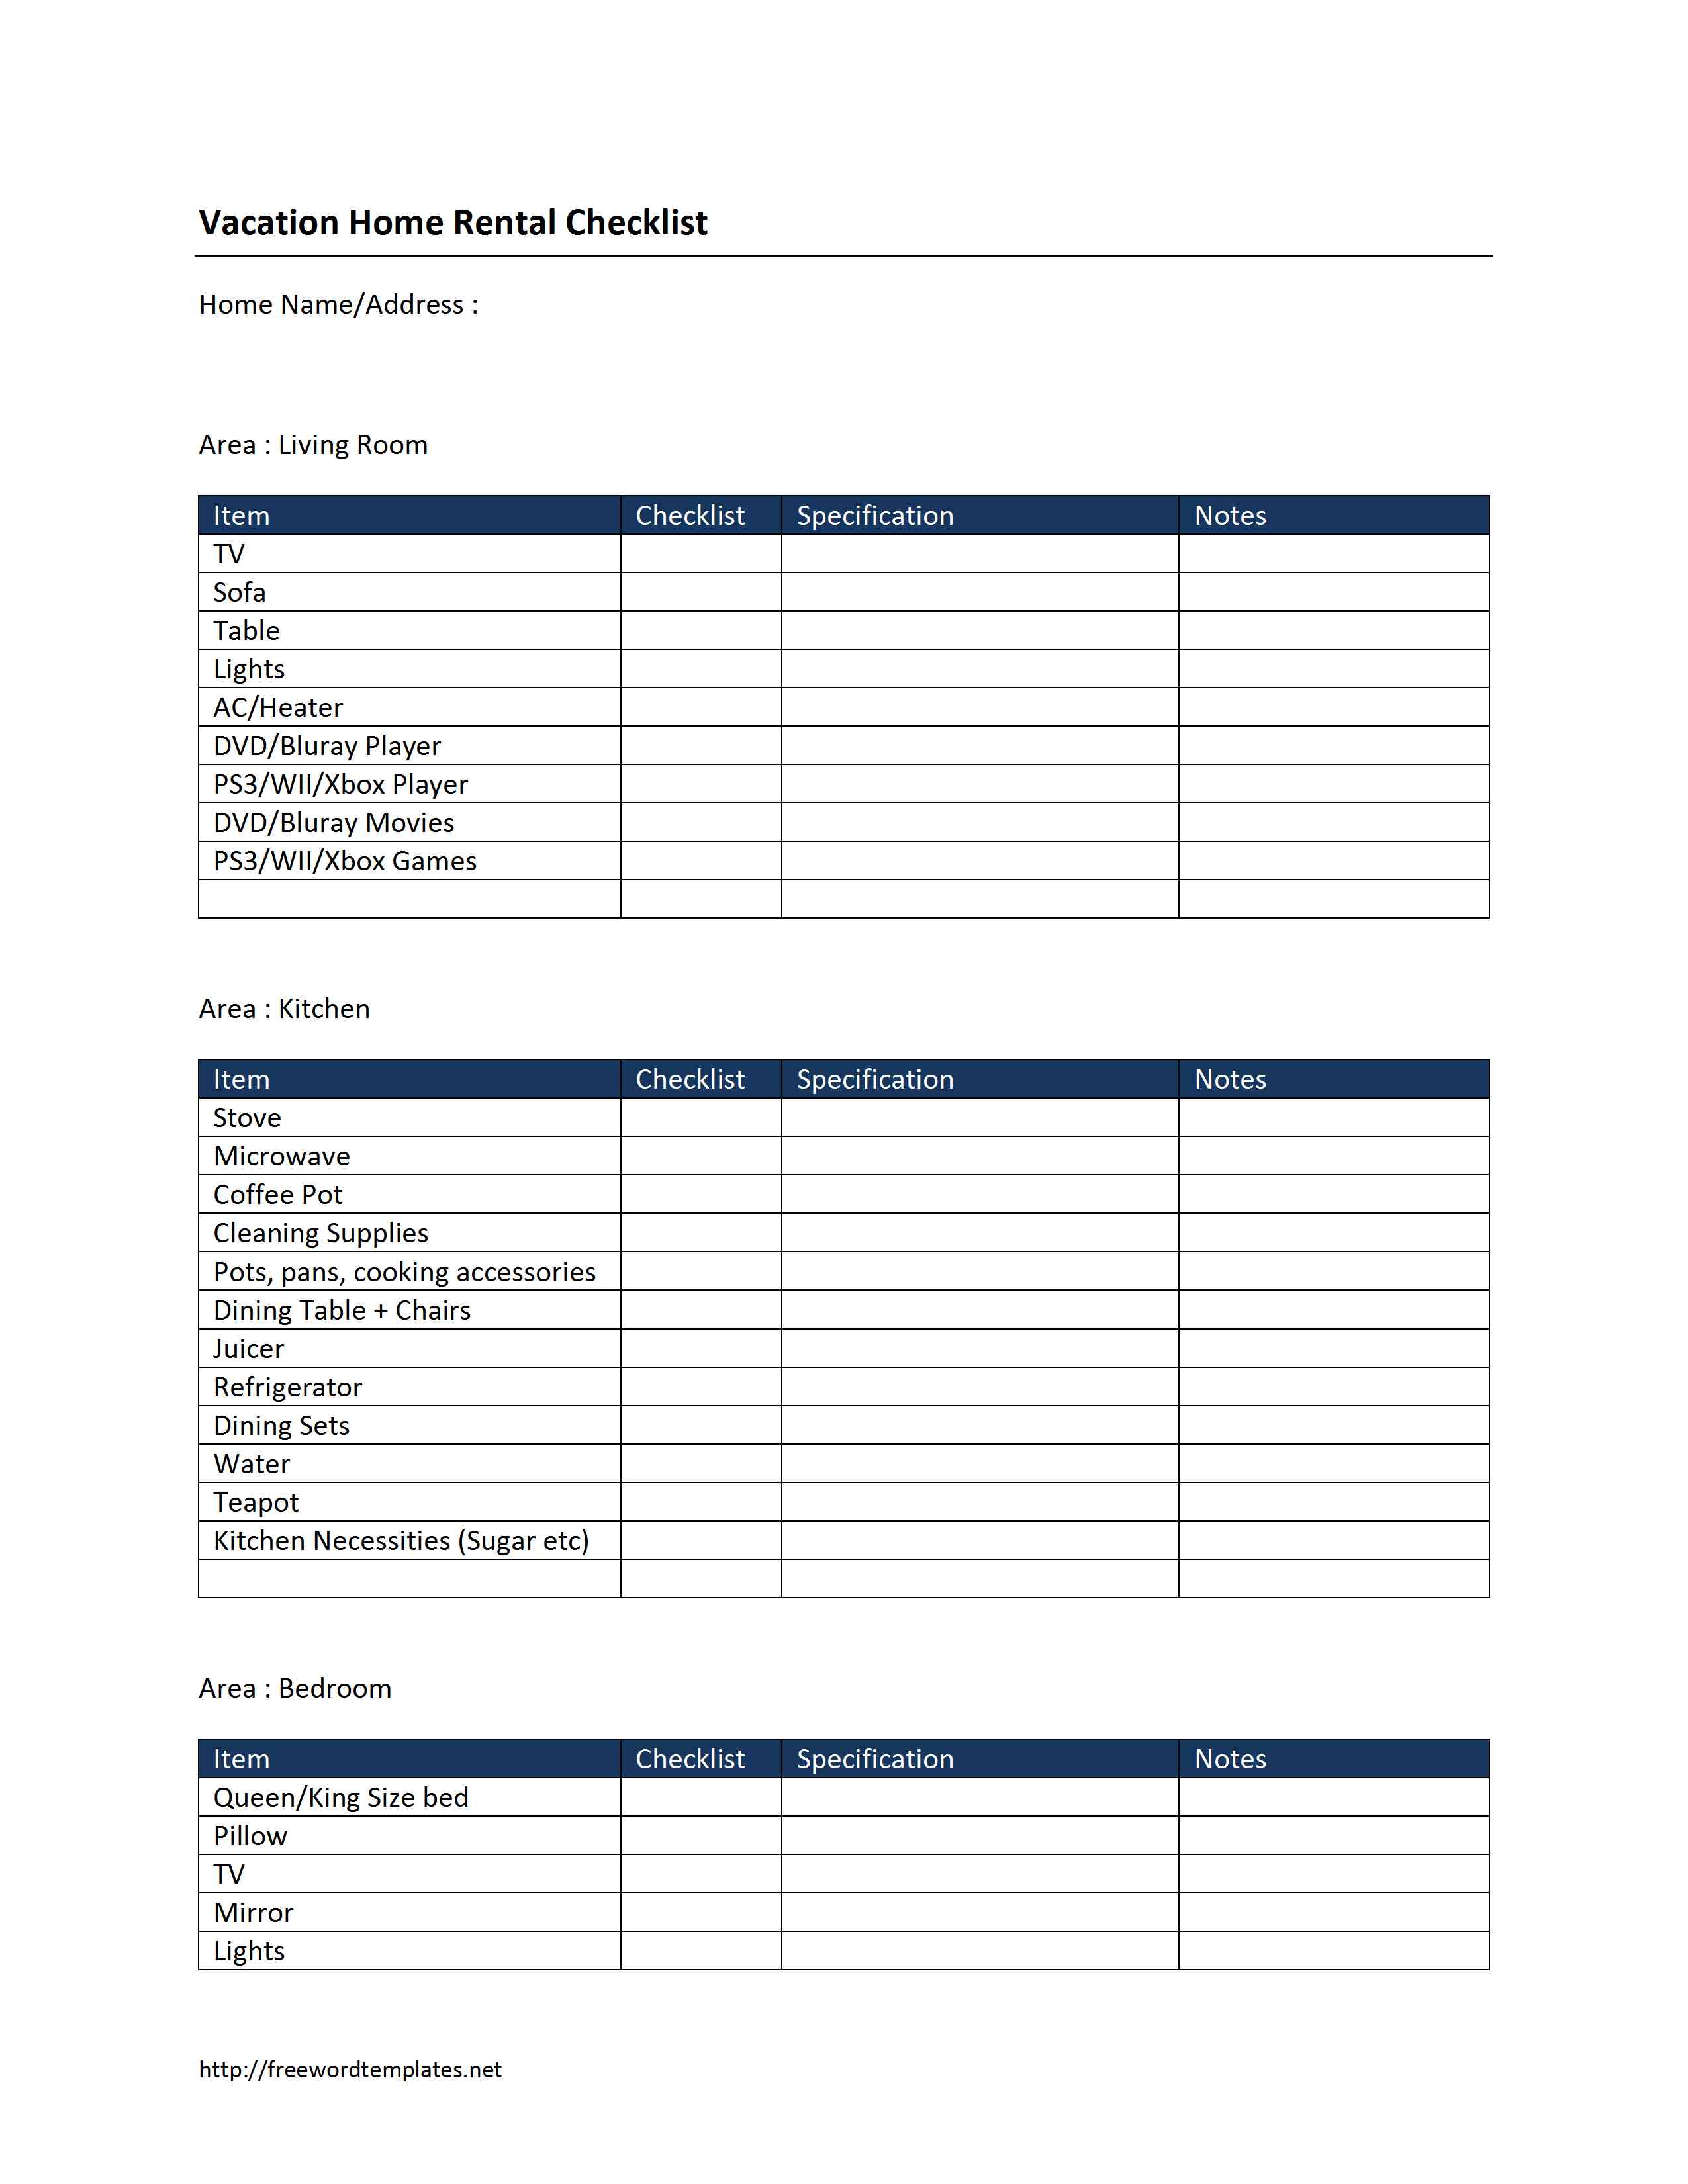 Vacation Home Rental Checklist Template for Word